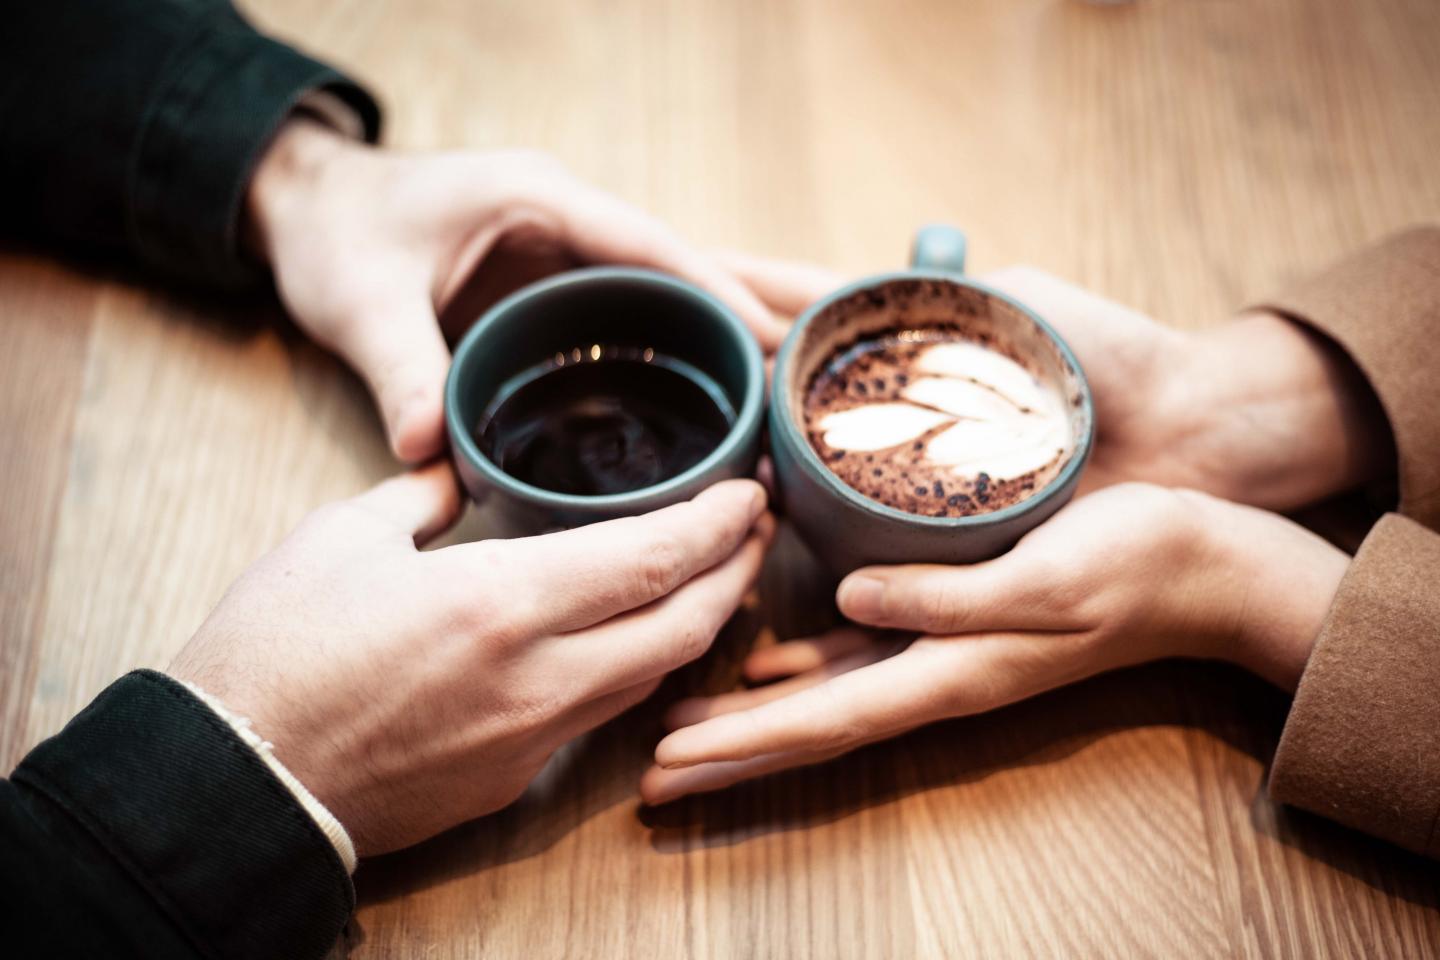 Hands of two people holding coffee cups on a table.